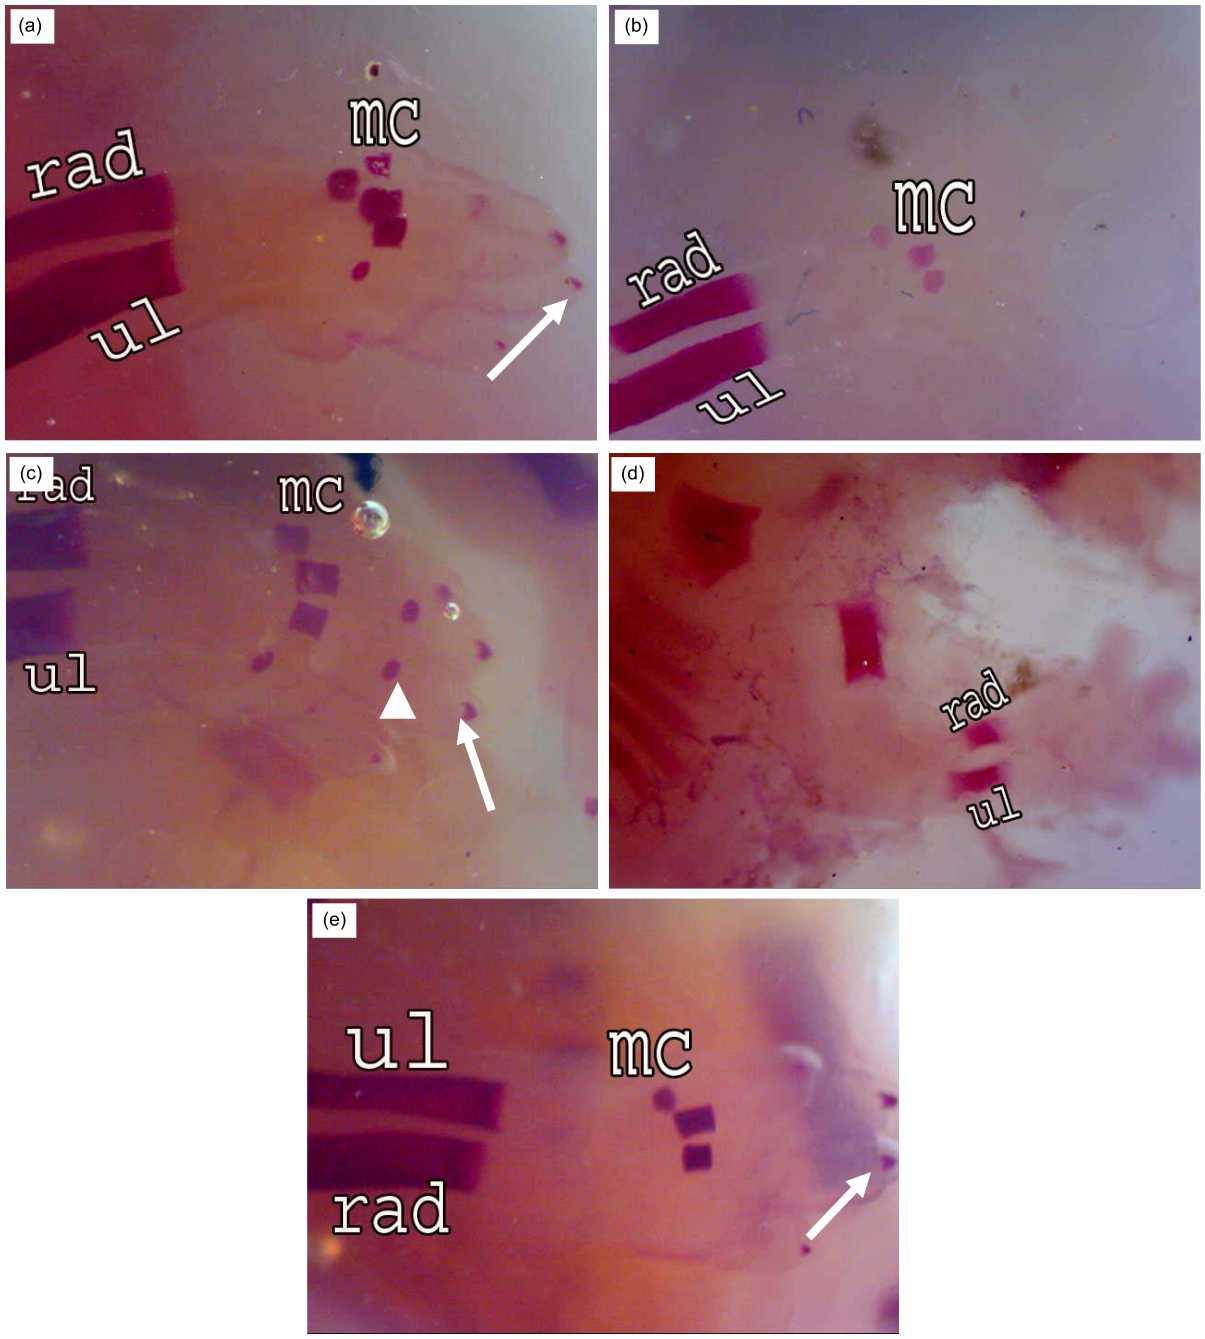 Image for - Effect of Bone Marrow Transplantation on the Fetal Skeleton of Maternally Irradiated Pregnant Rats